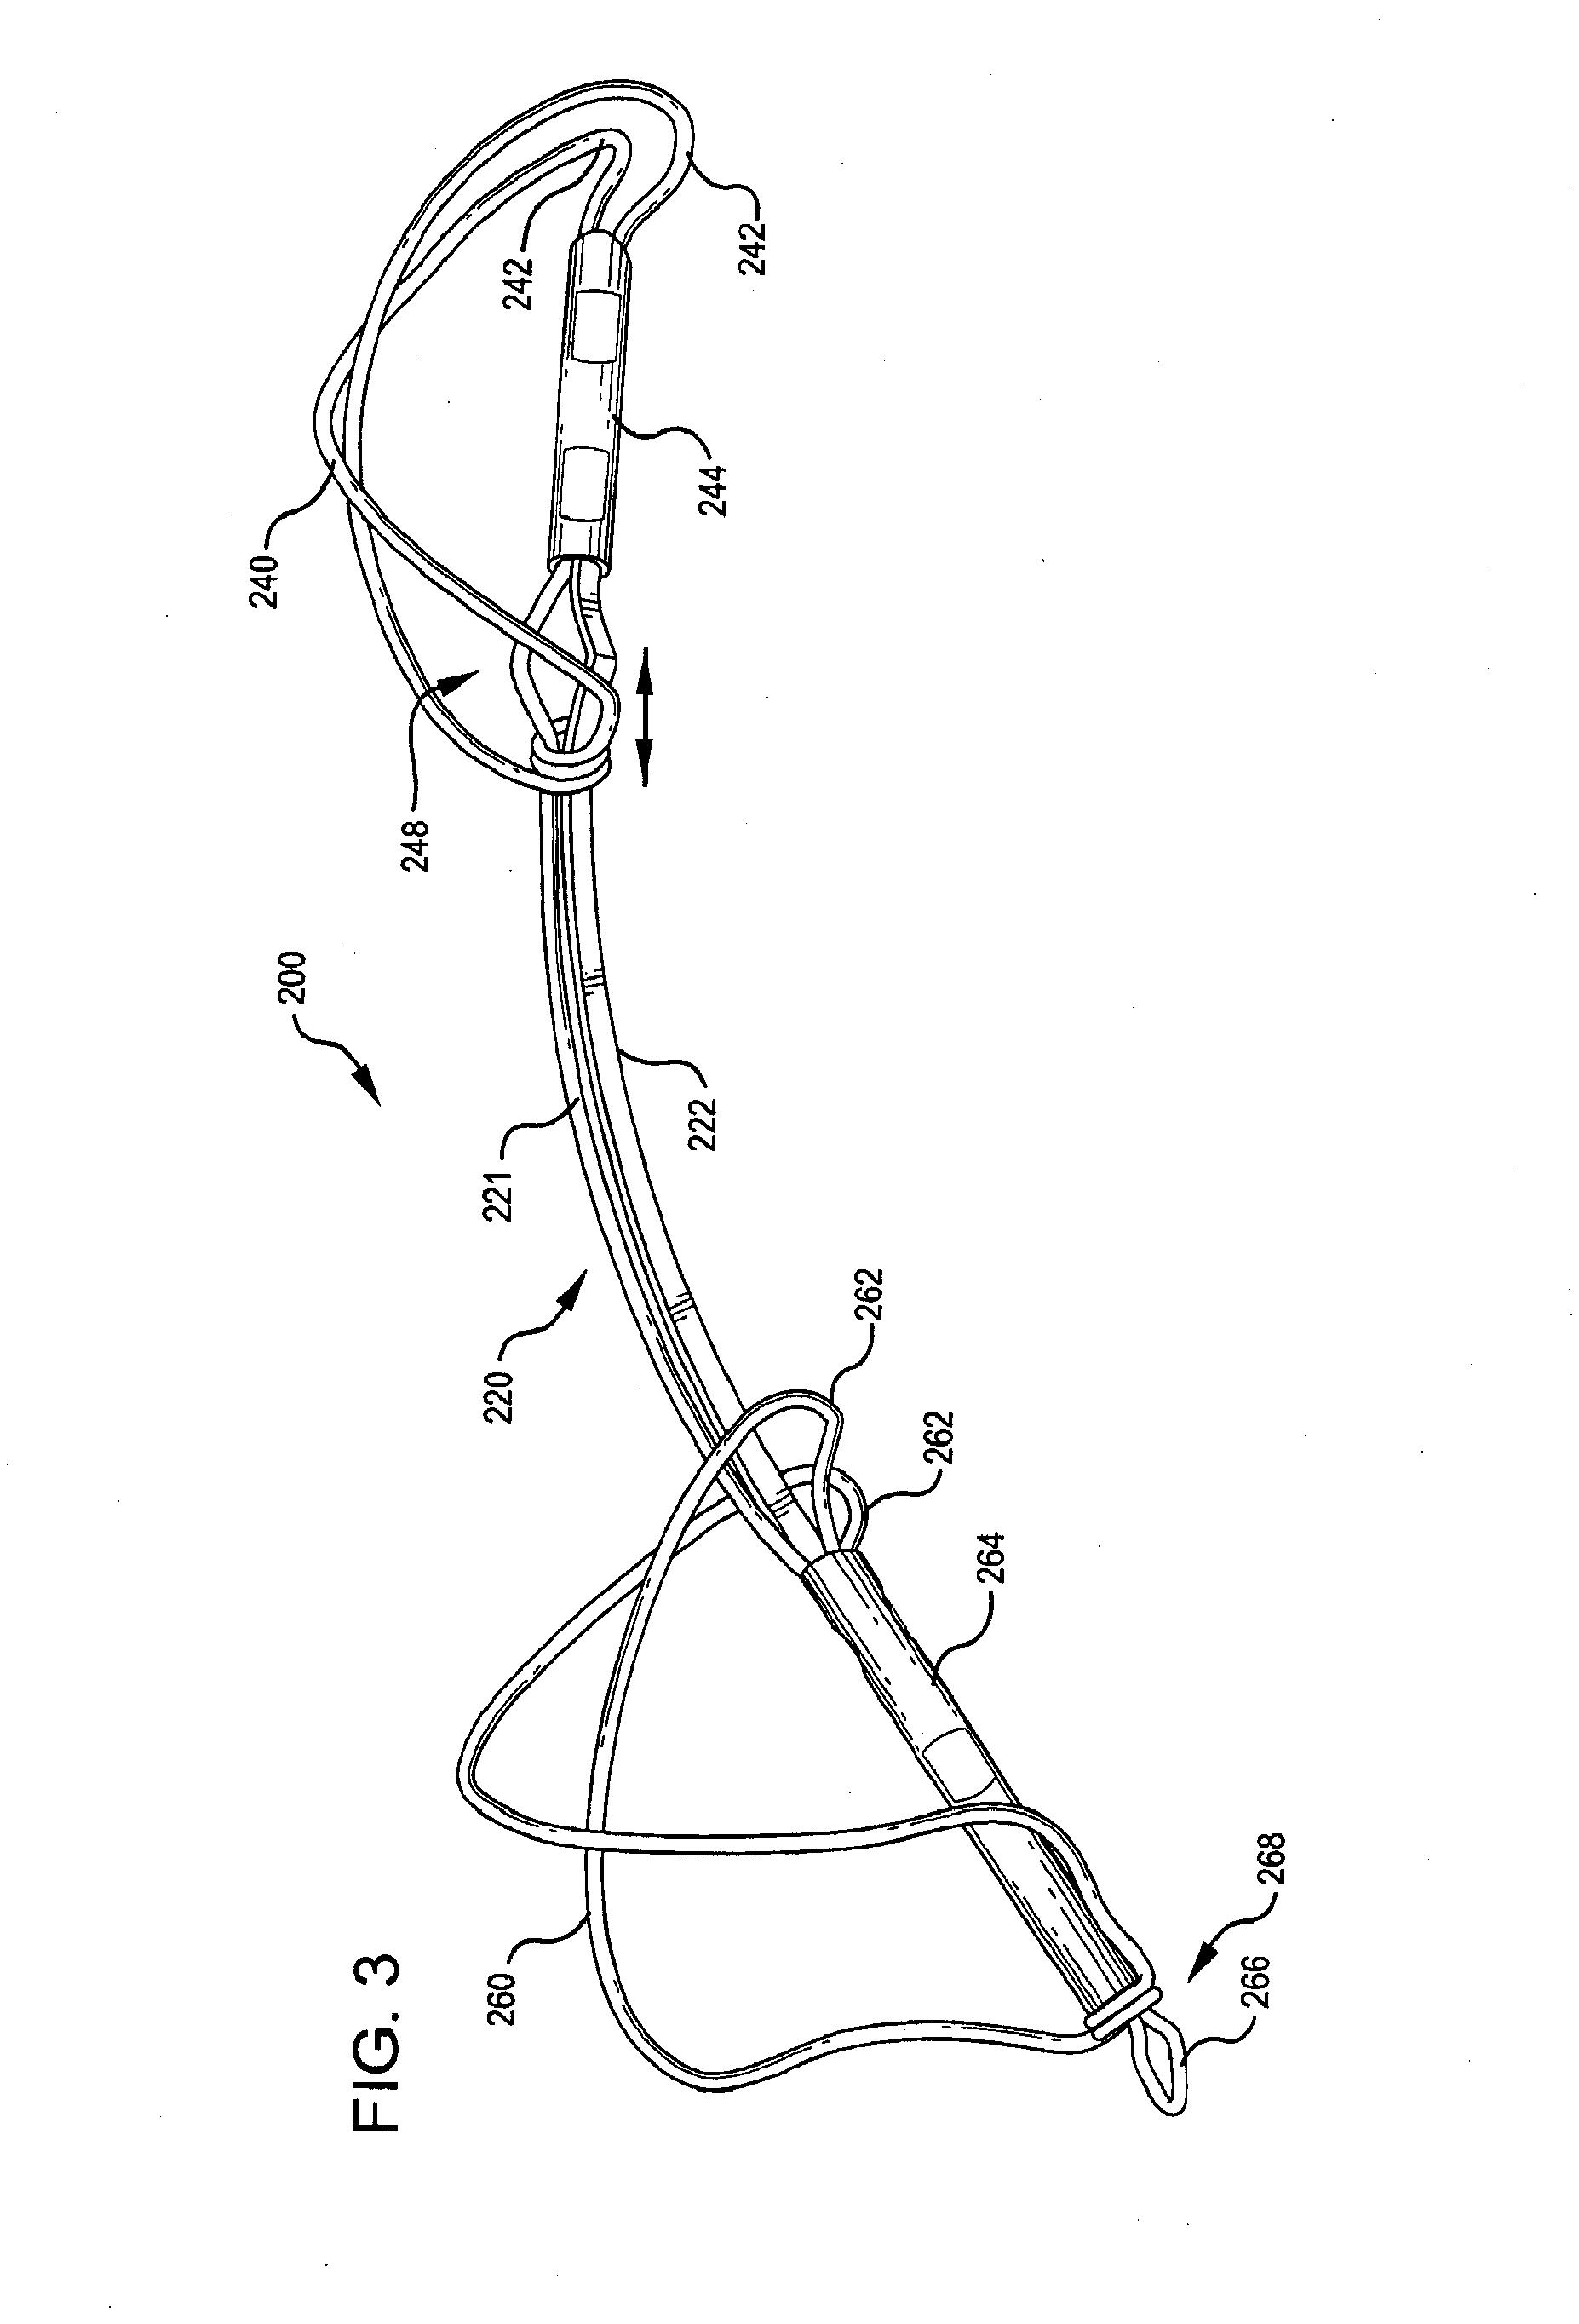 Body lumen shaping device with cardiac leads